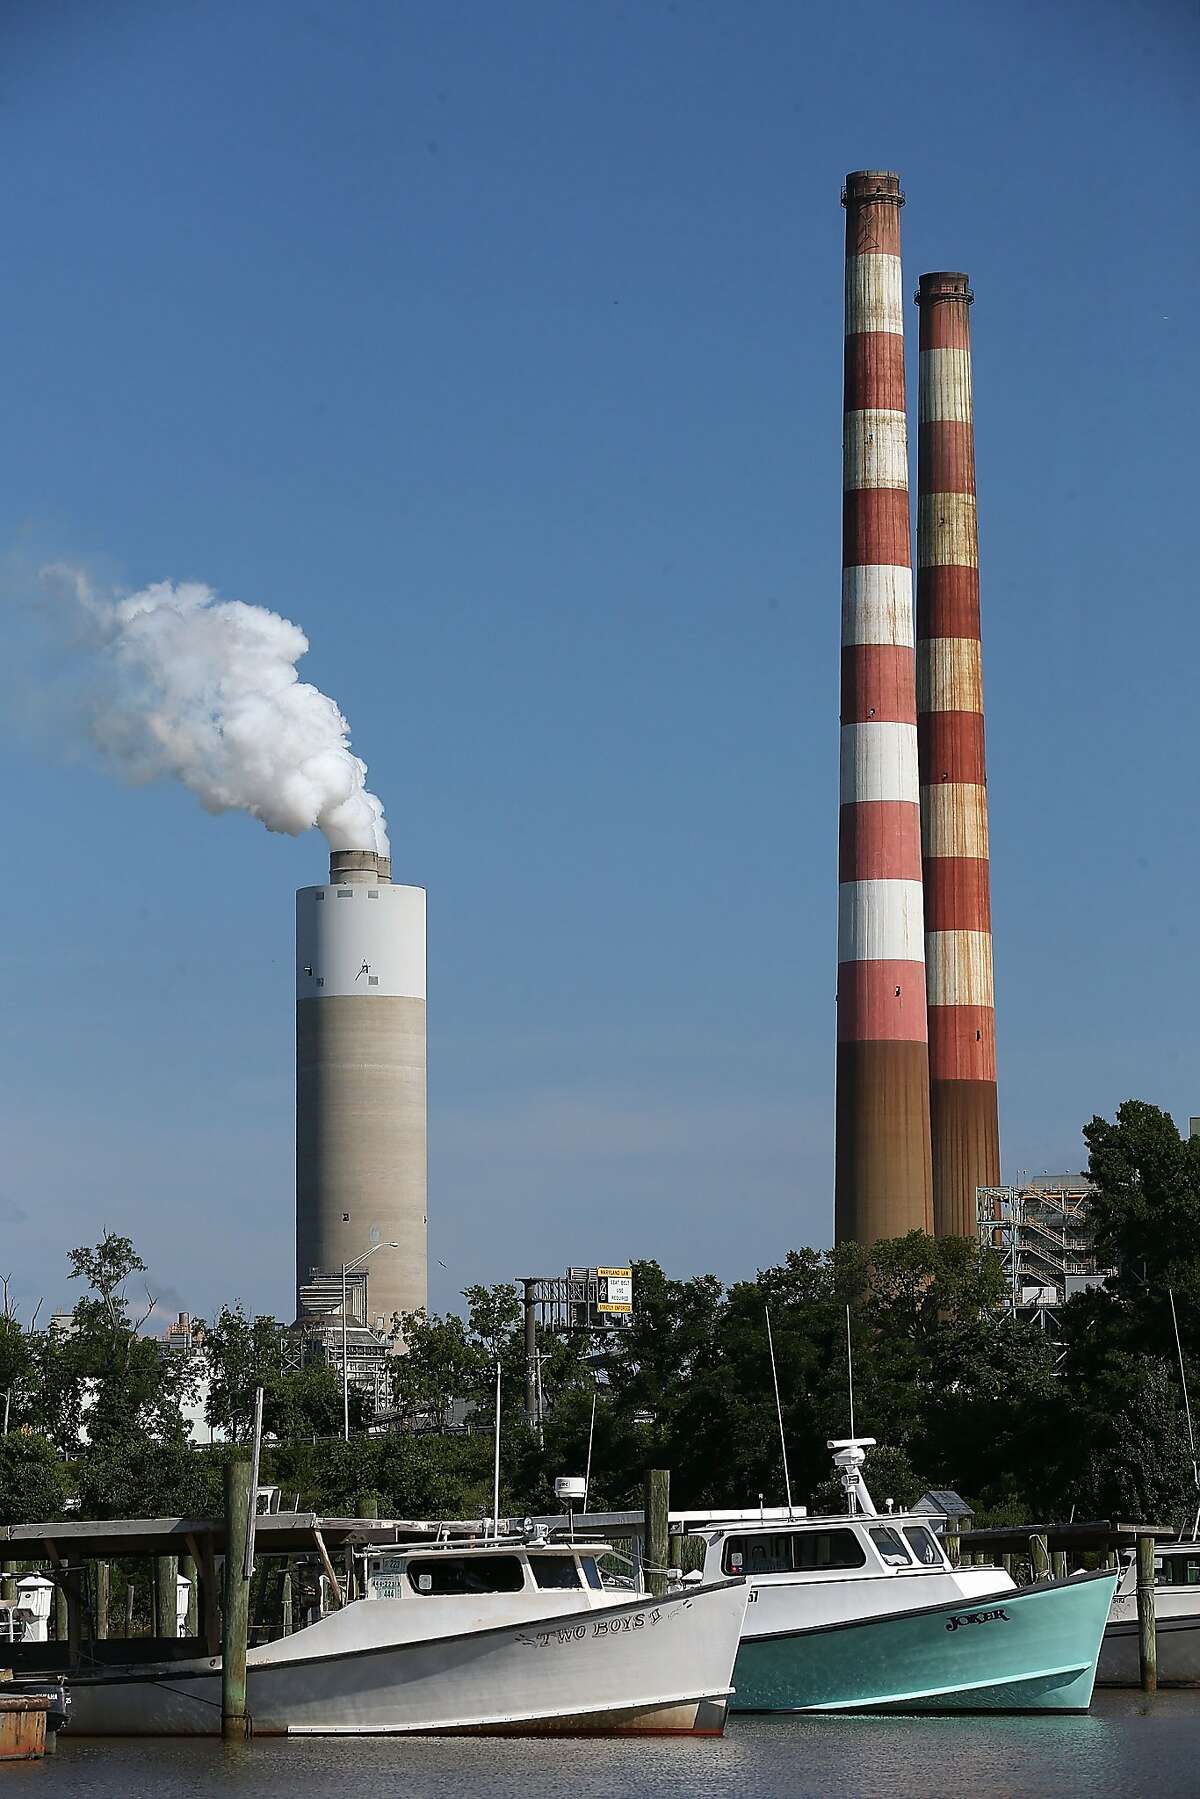 NEWBURG, MD - JUNE 29: Boats are docked at the Aqualand Marina as emissions spew out of a large stack nearby at the coal-fired Morgantown Generating Station June 29, 2015 in Newburg, Maryland. Today the U.S. Supreme Court ruled against the Environmental Protection Agency's (EPA) effort to limit certain power plant emissions -- saying the agency "unreasonably" failed to consider the cost of the regulations. (Photo by Mark Wilson/Getty Images)